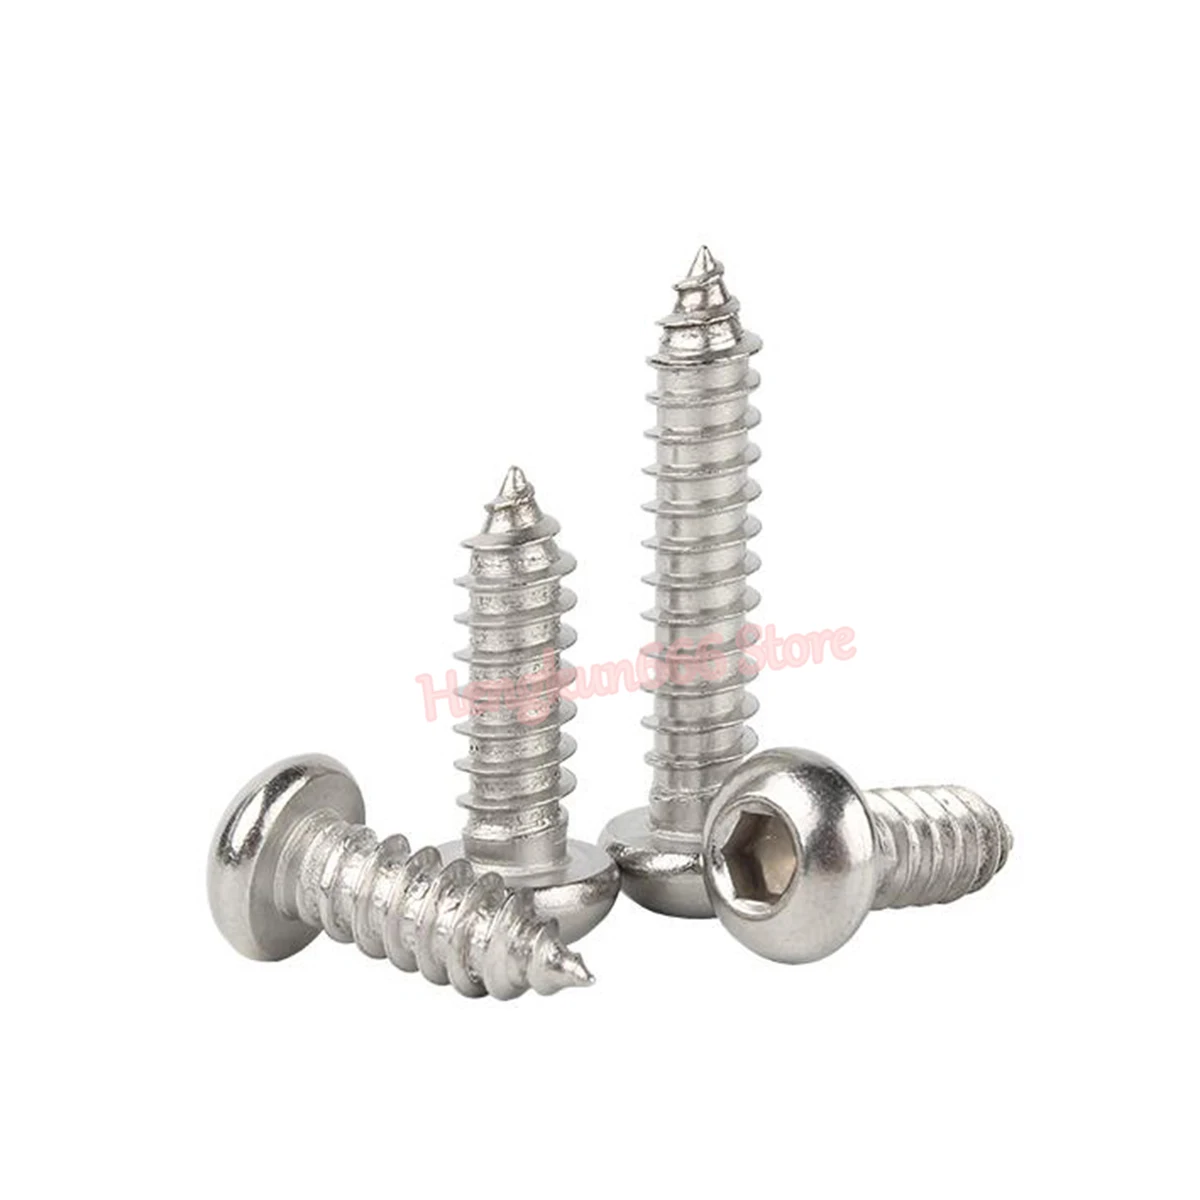 M3 M4 M5 M6 HEX SOCKET BUTTON HEAD SELF TAPPING SCREWS WOOD SCREWS A2 STAINLESS 